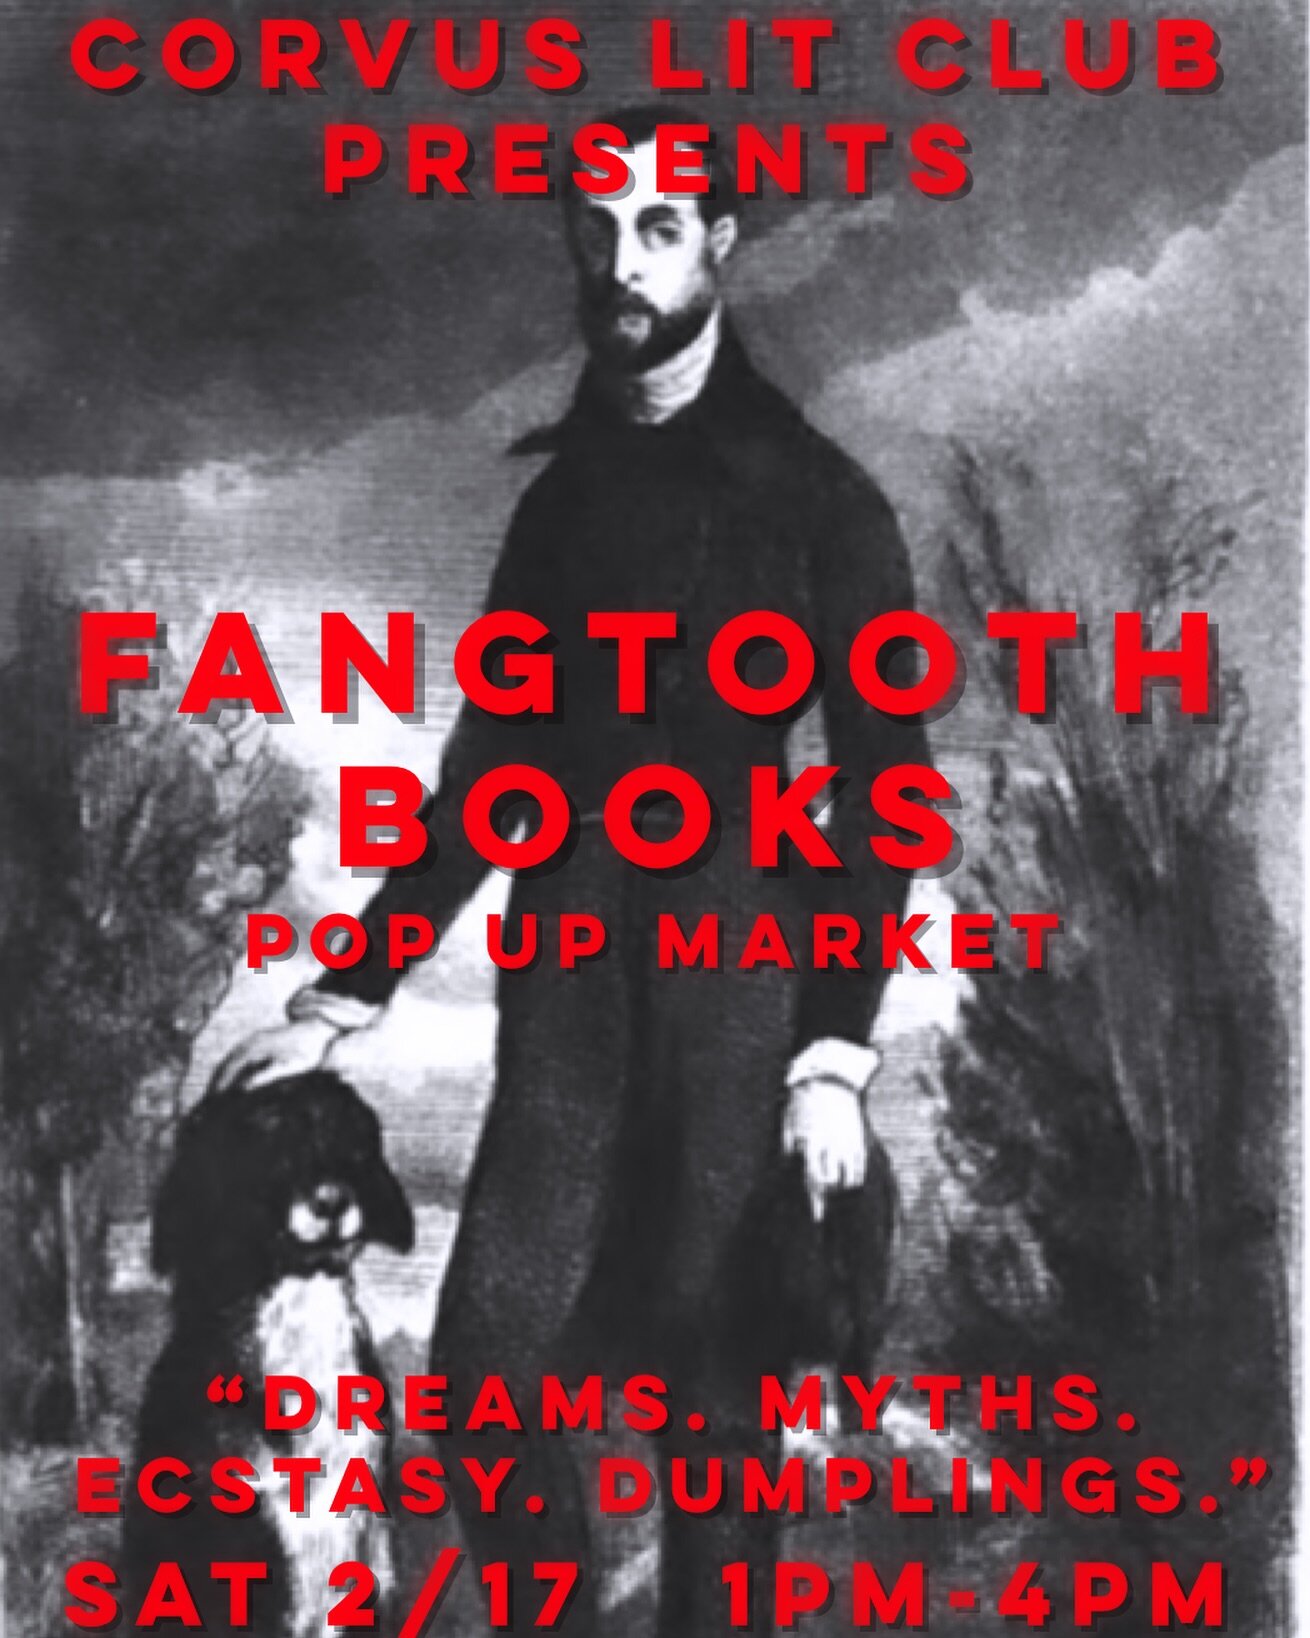 The first installment of Books &amp; Booze is happening this Saturday! We&rsquo;re stoked to feature @fangtooth_books, a purveyor of fine literary objects for the curious and brave. Come by and get Lit! As always, it&rsquo;ll be Happy Hour from open 